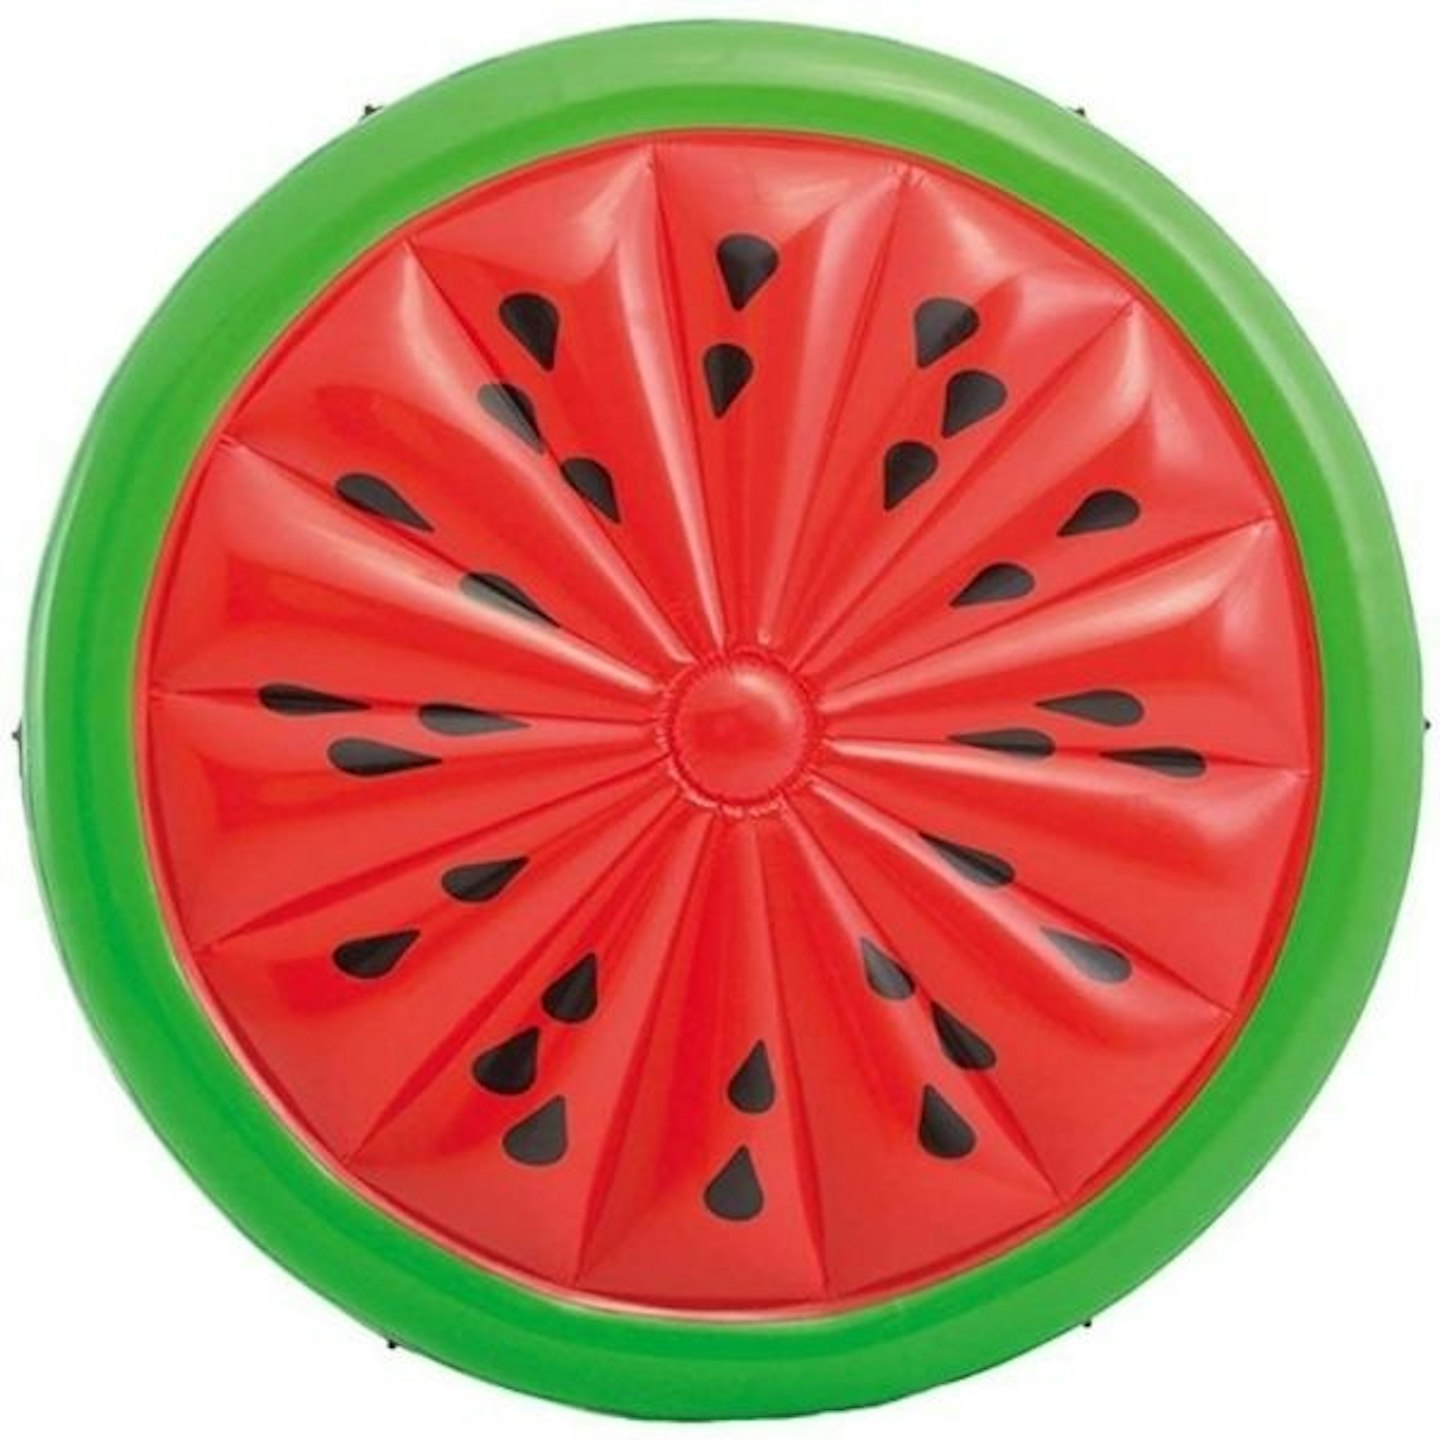 Unibos Inflatable Watermelon Pool Lounger